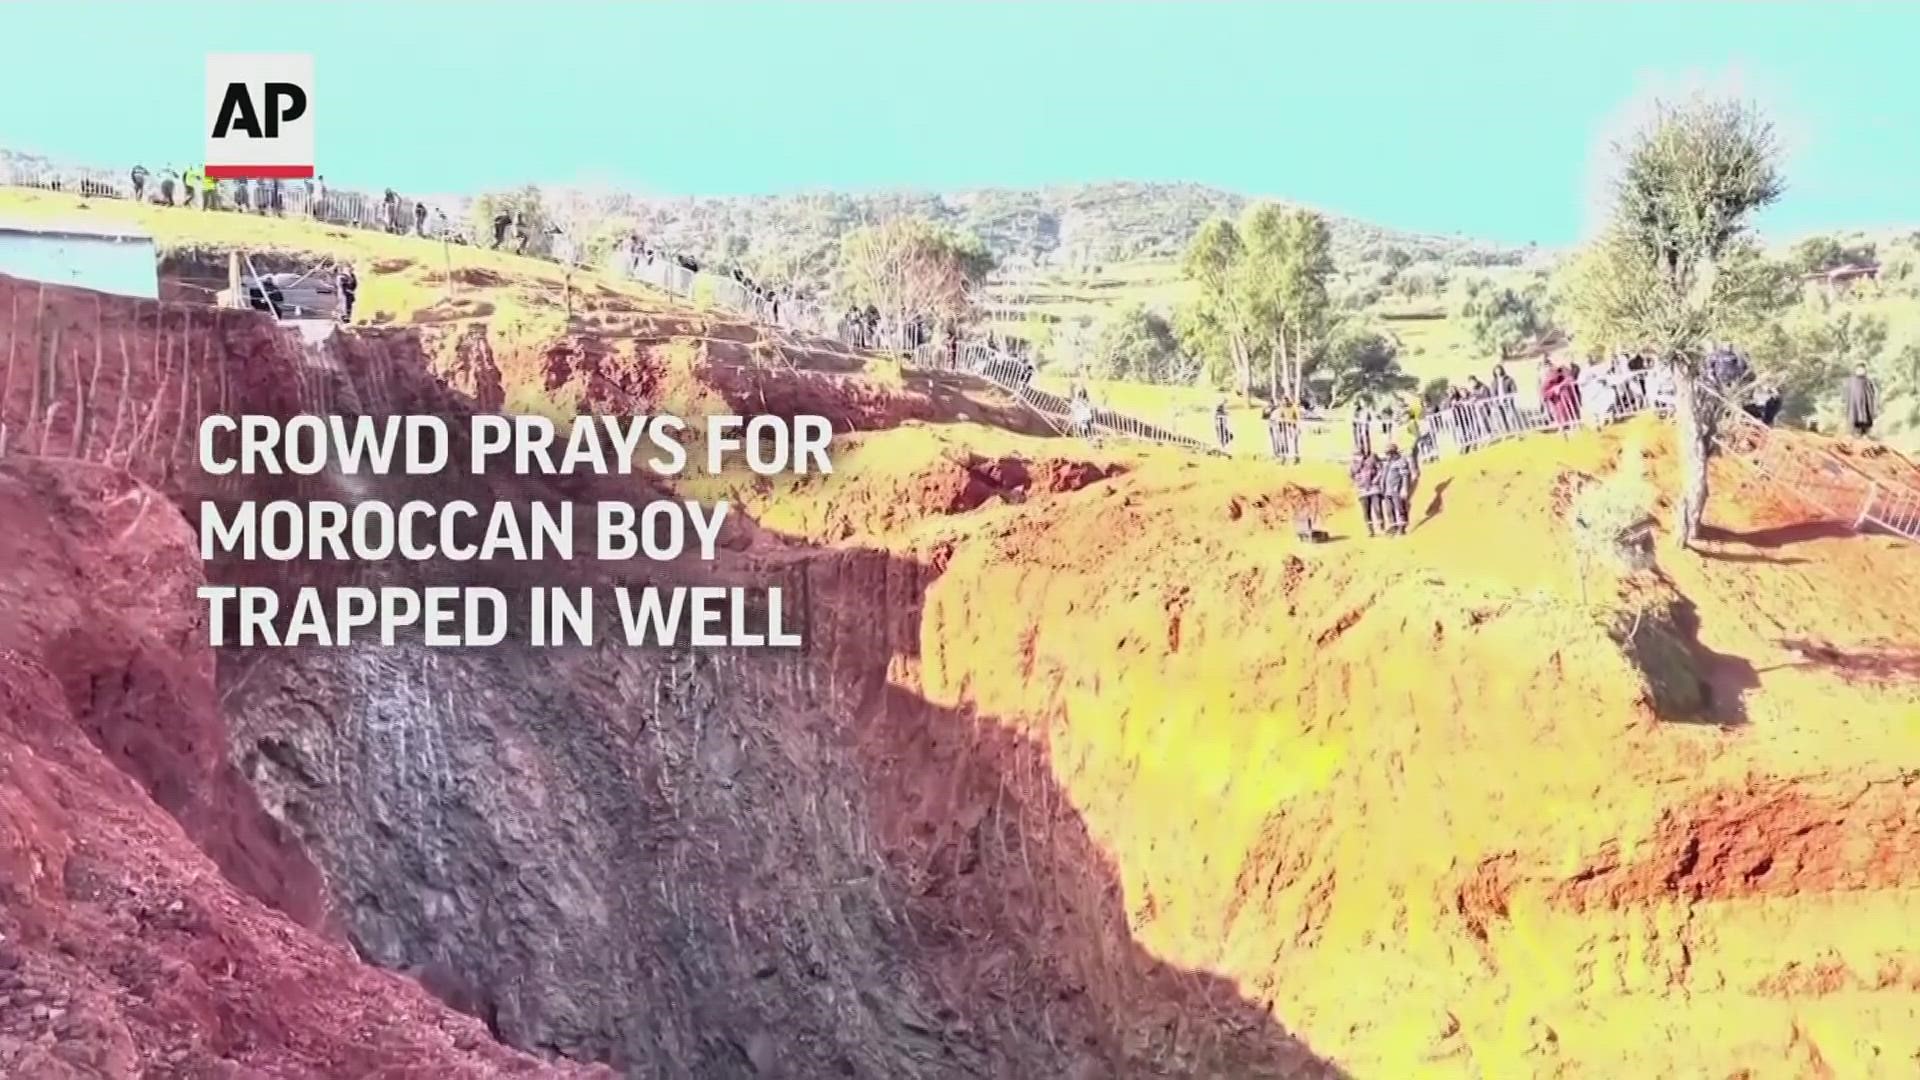 Later on Saturday, Moroccan rescuers pulled the boy out of the deep well. He had been trapped for four days.